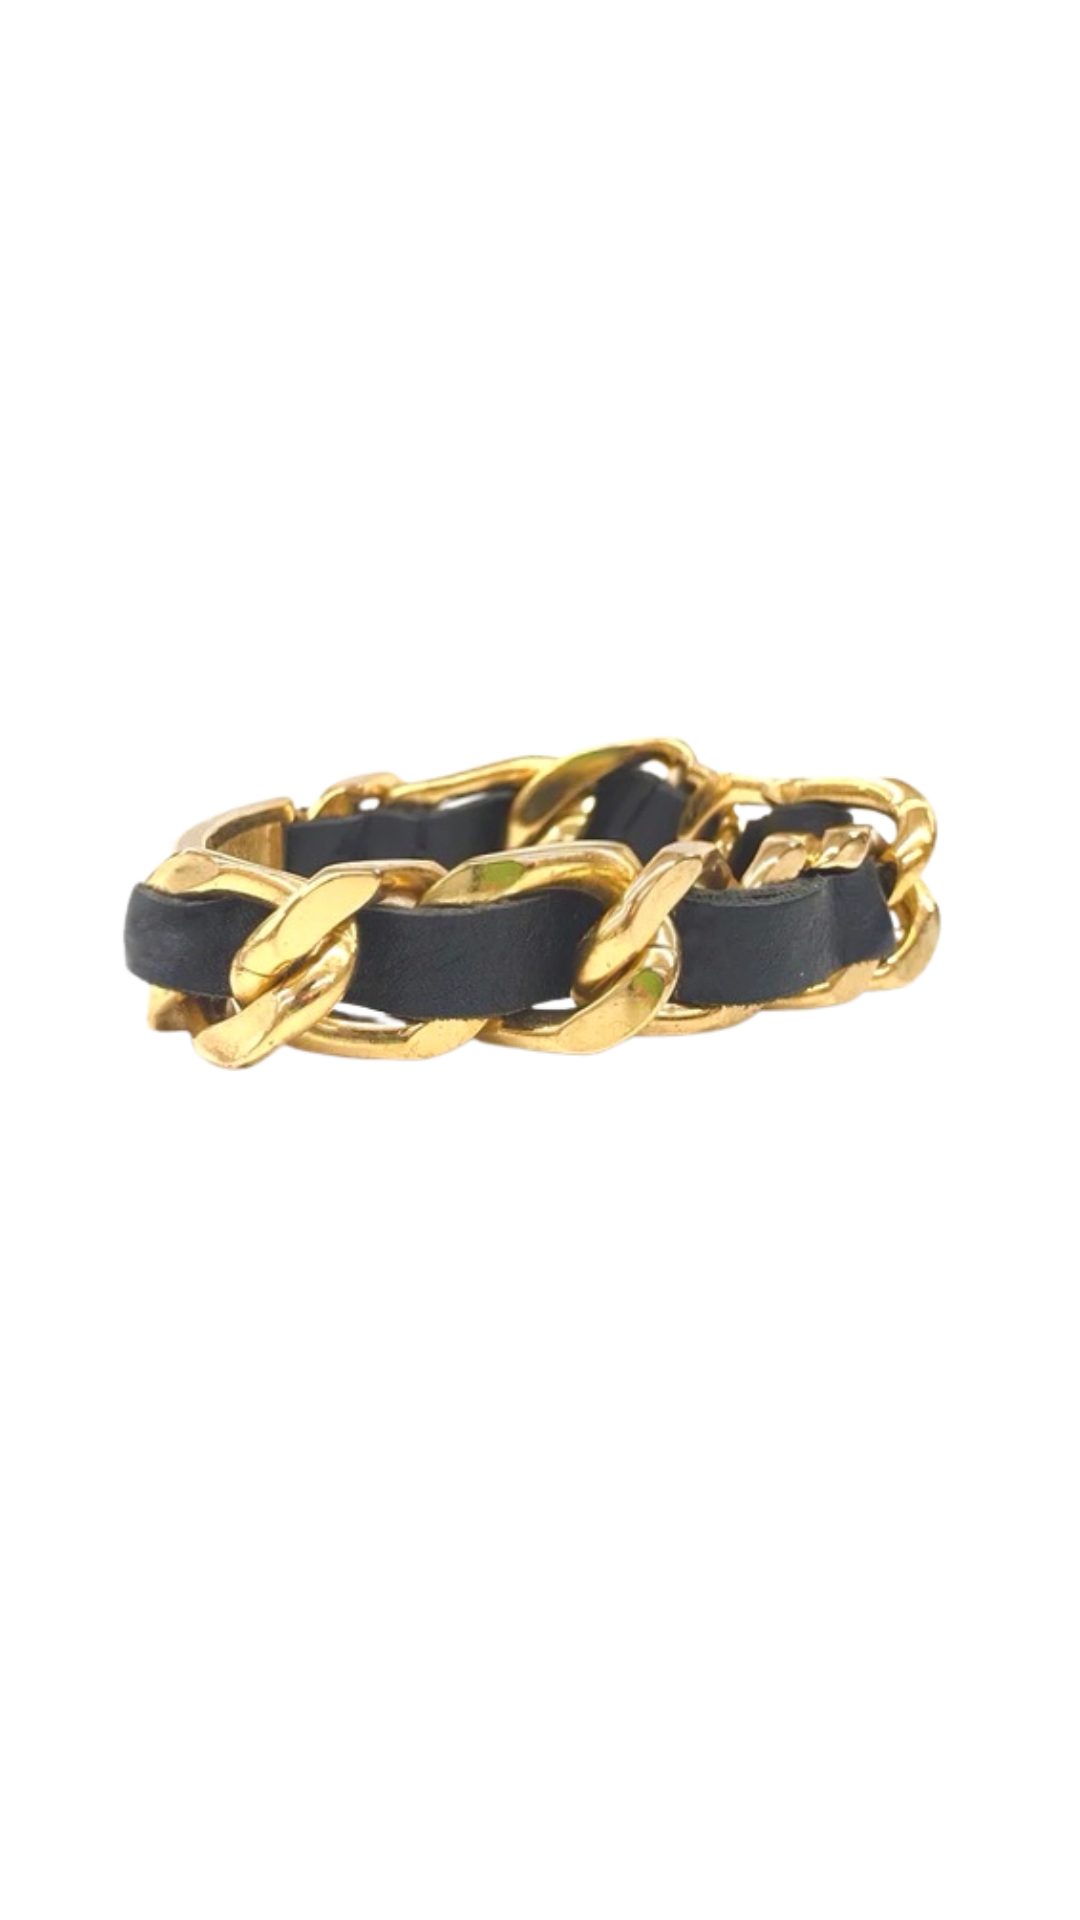 Chanel 2000s Rare Gold and Leather Bracelet